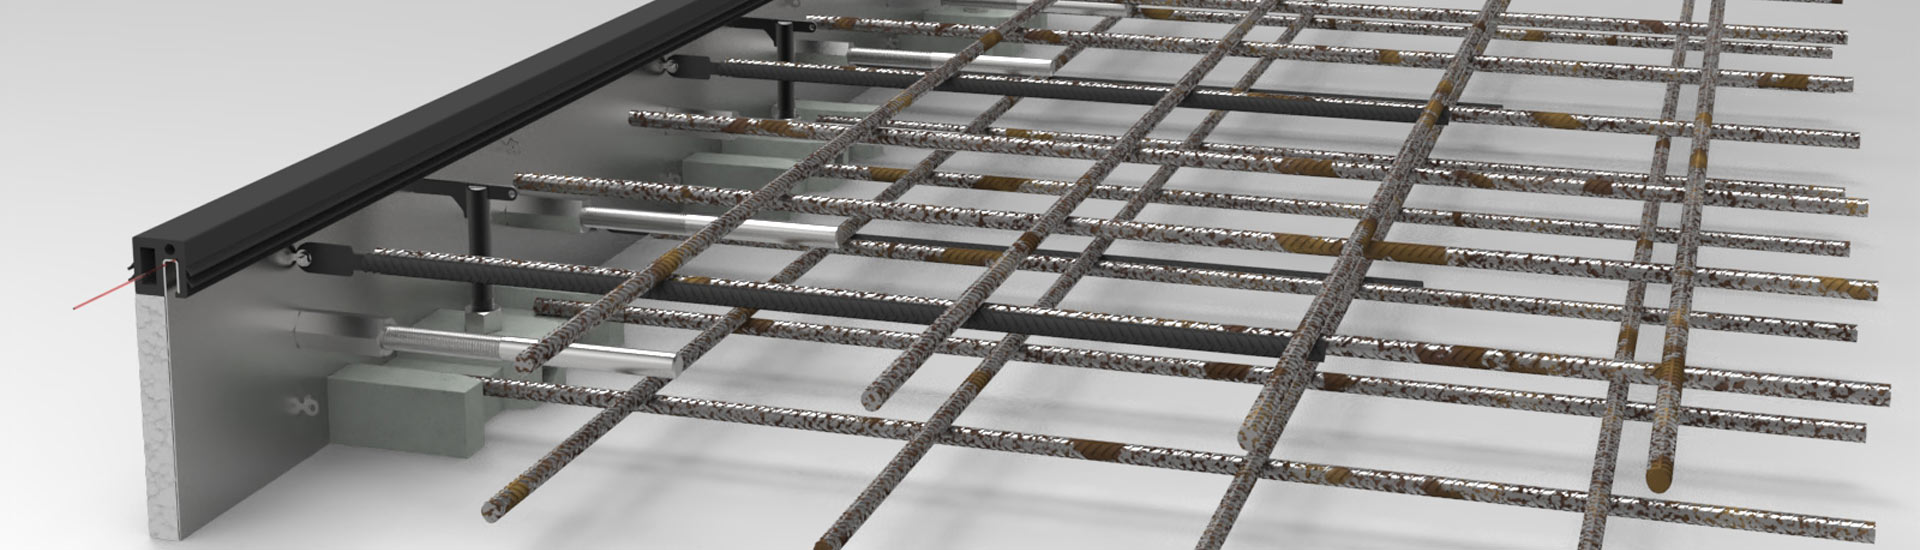 Acra Screed Concrete Expansion Joint System